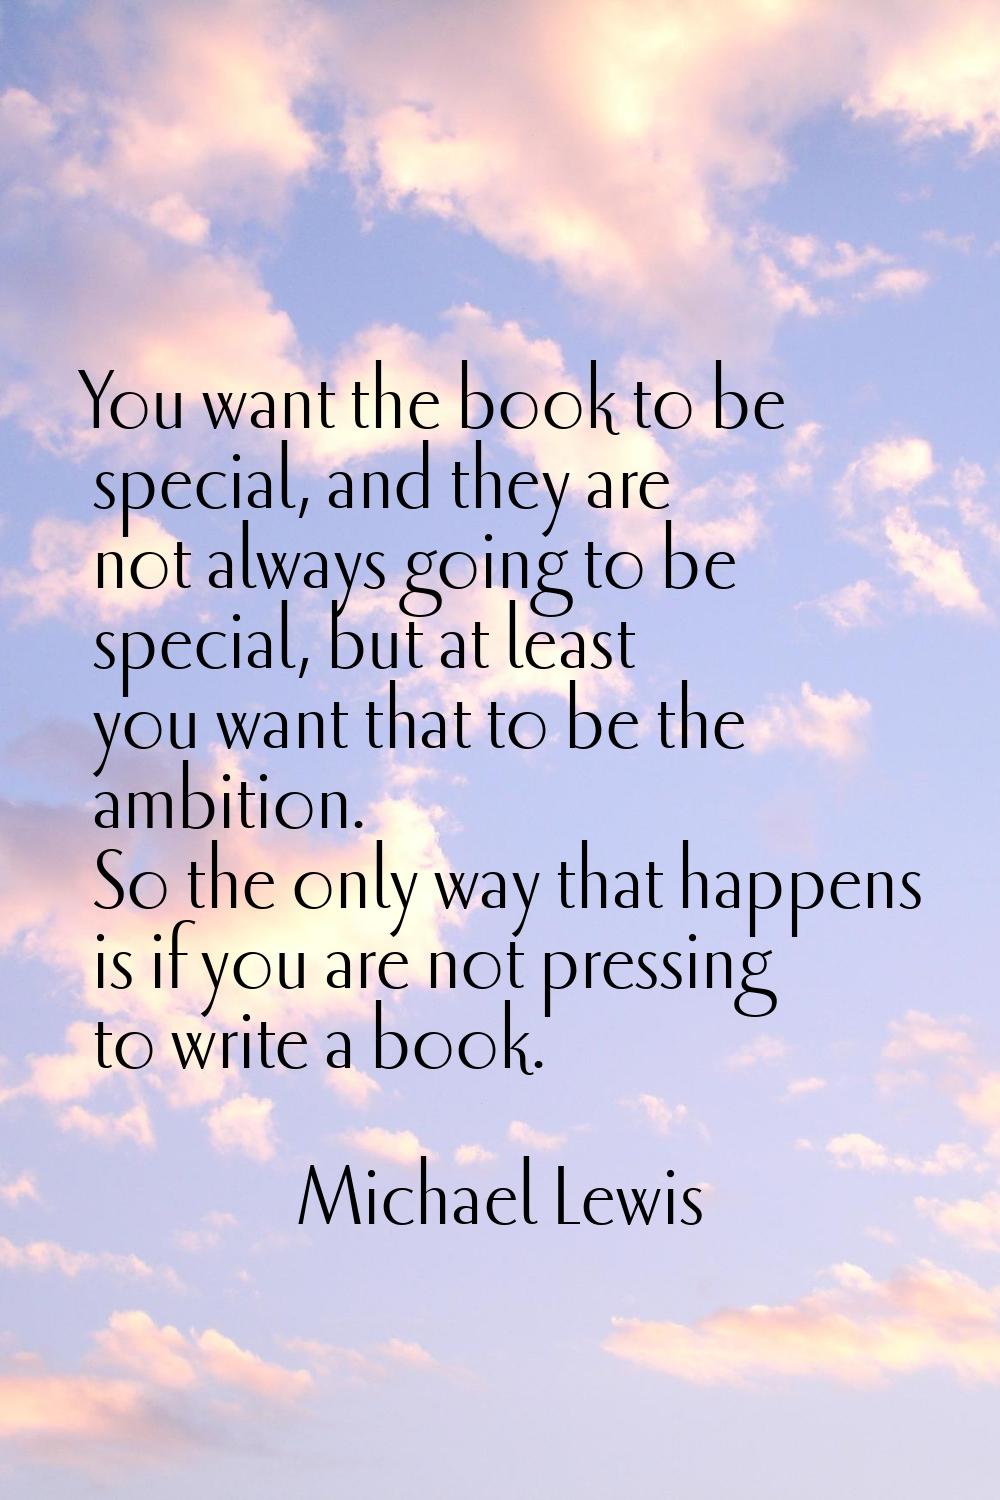 You want the book to be special, and they are not always going to be special, but at least you want